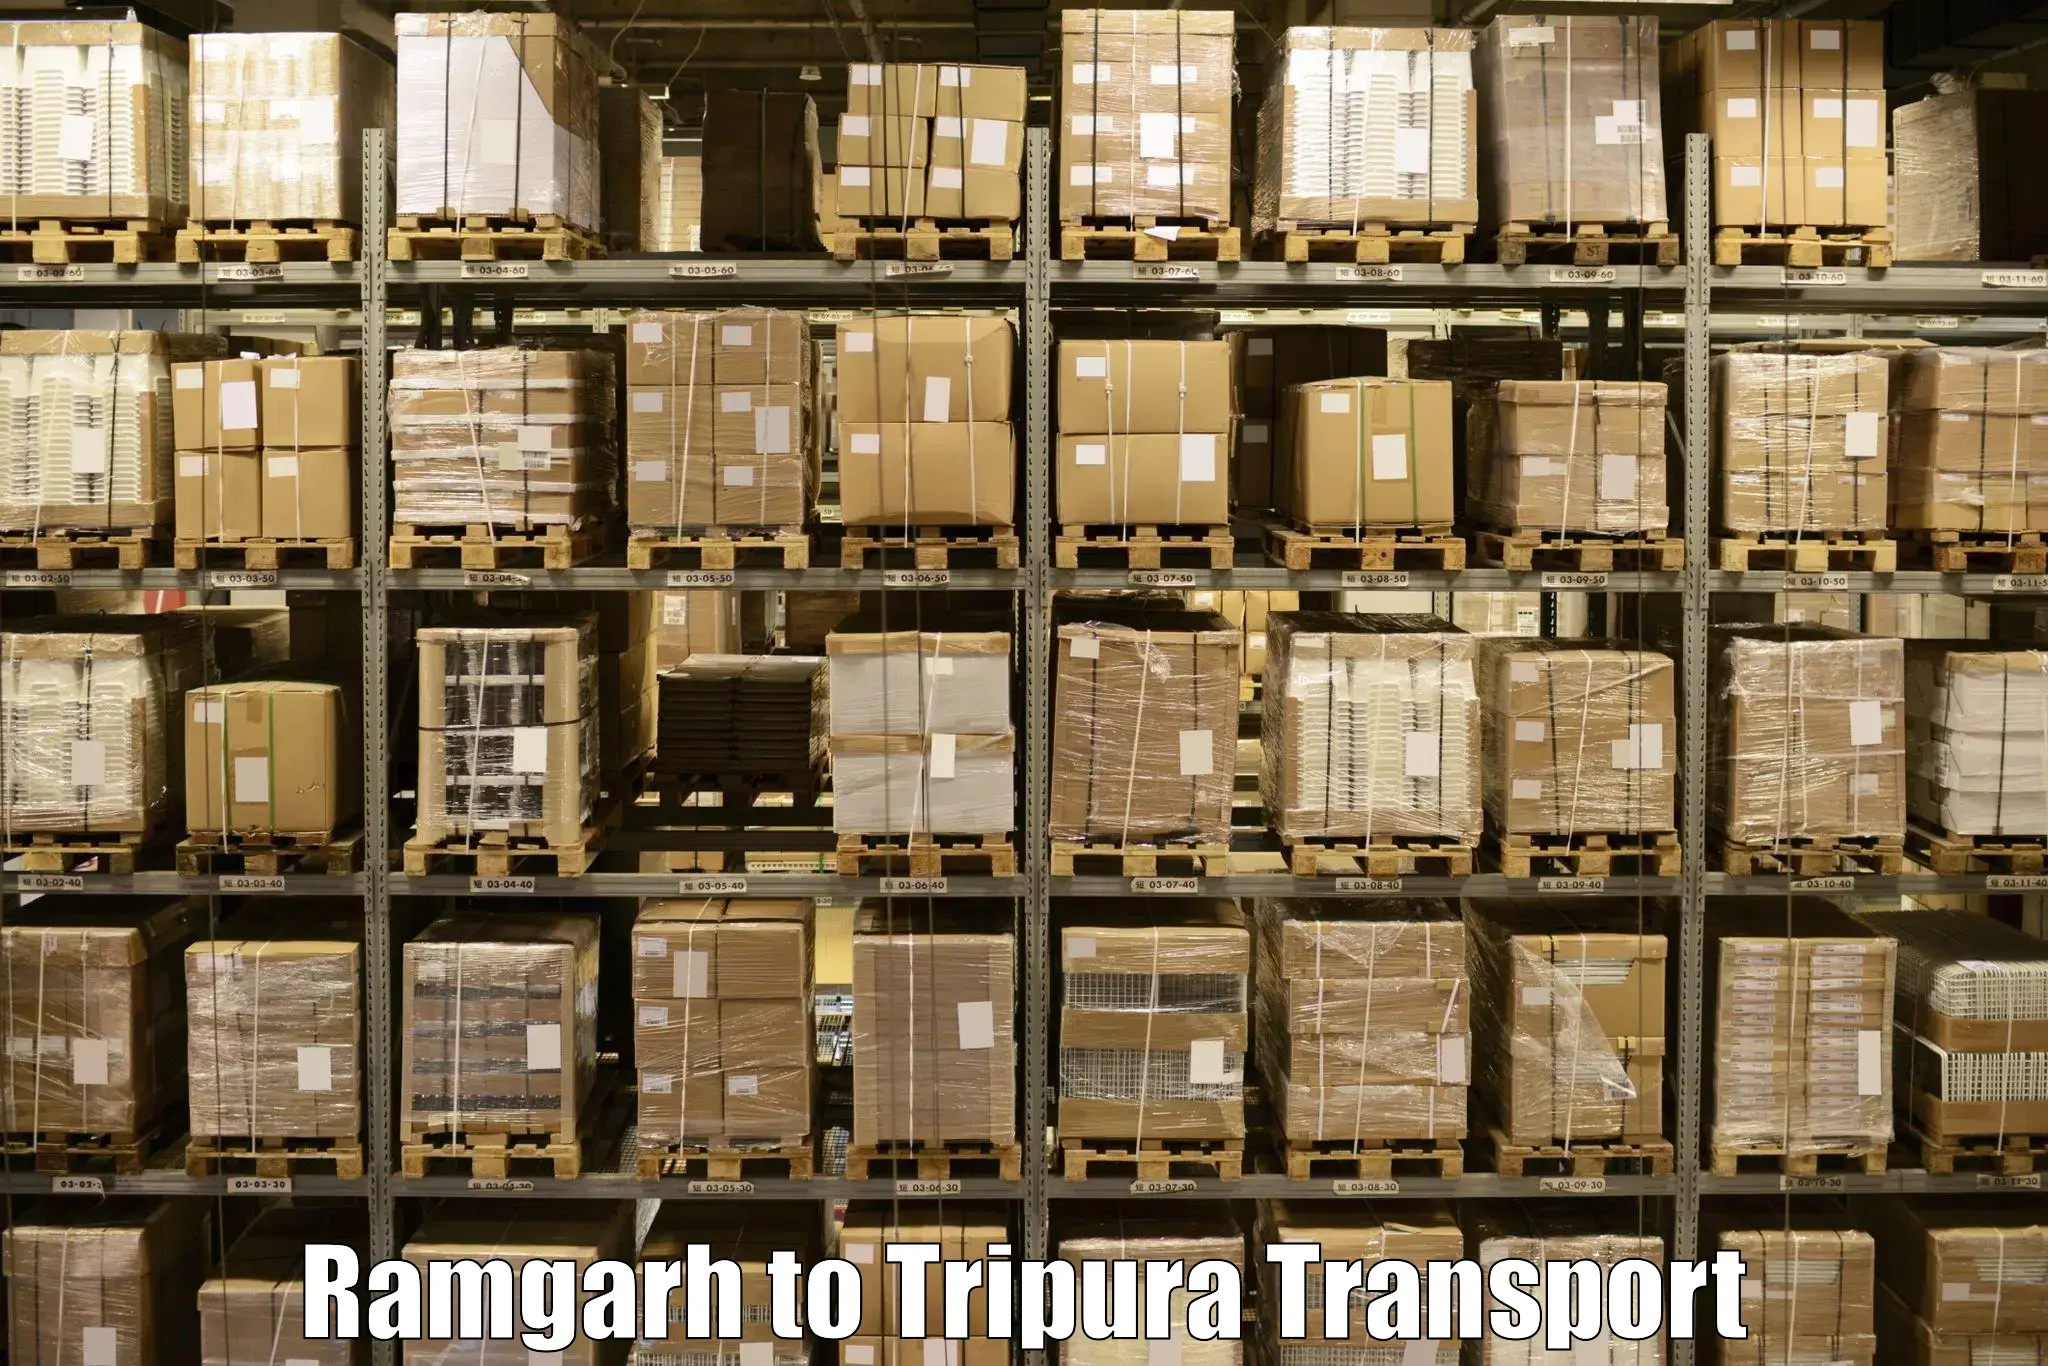 Air cargo transport services Ramgarh to Udaipur Tripura